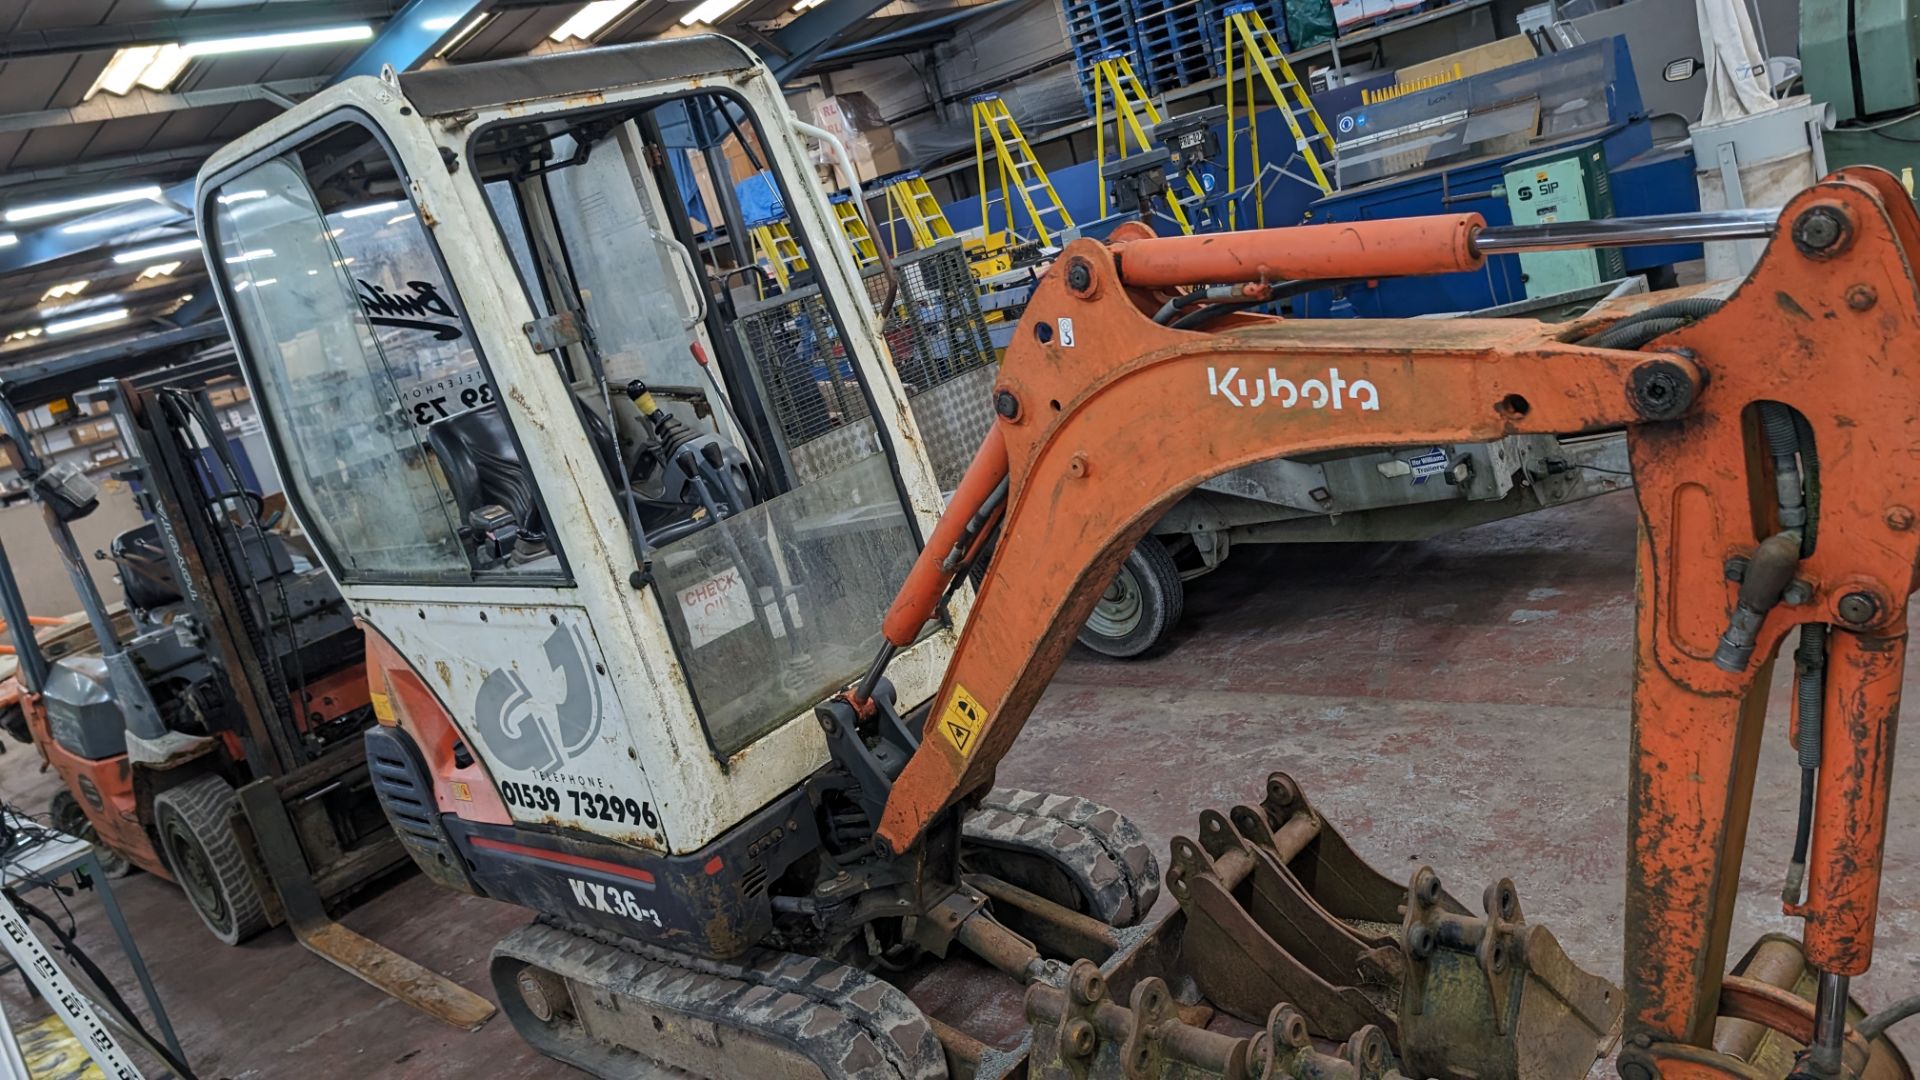 Kubota model KX36-3 tracked mini excavator including a total of 7 buckets (the large bucket connecte - Image 19 of 23